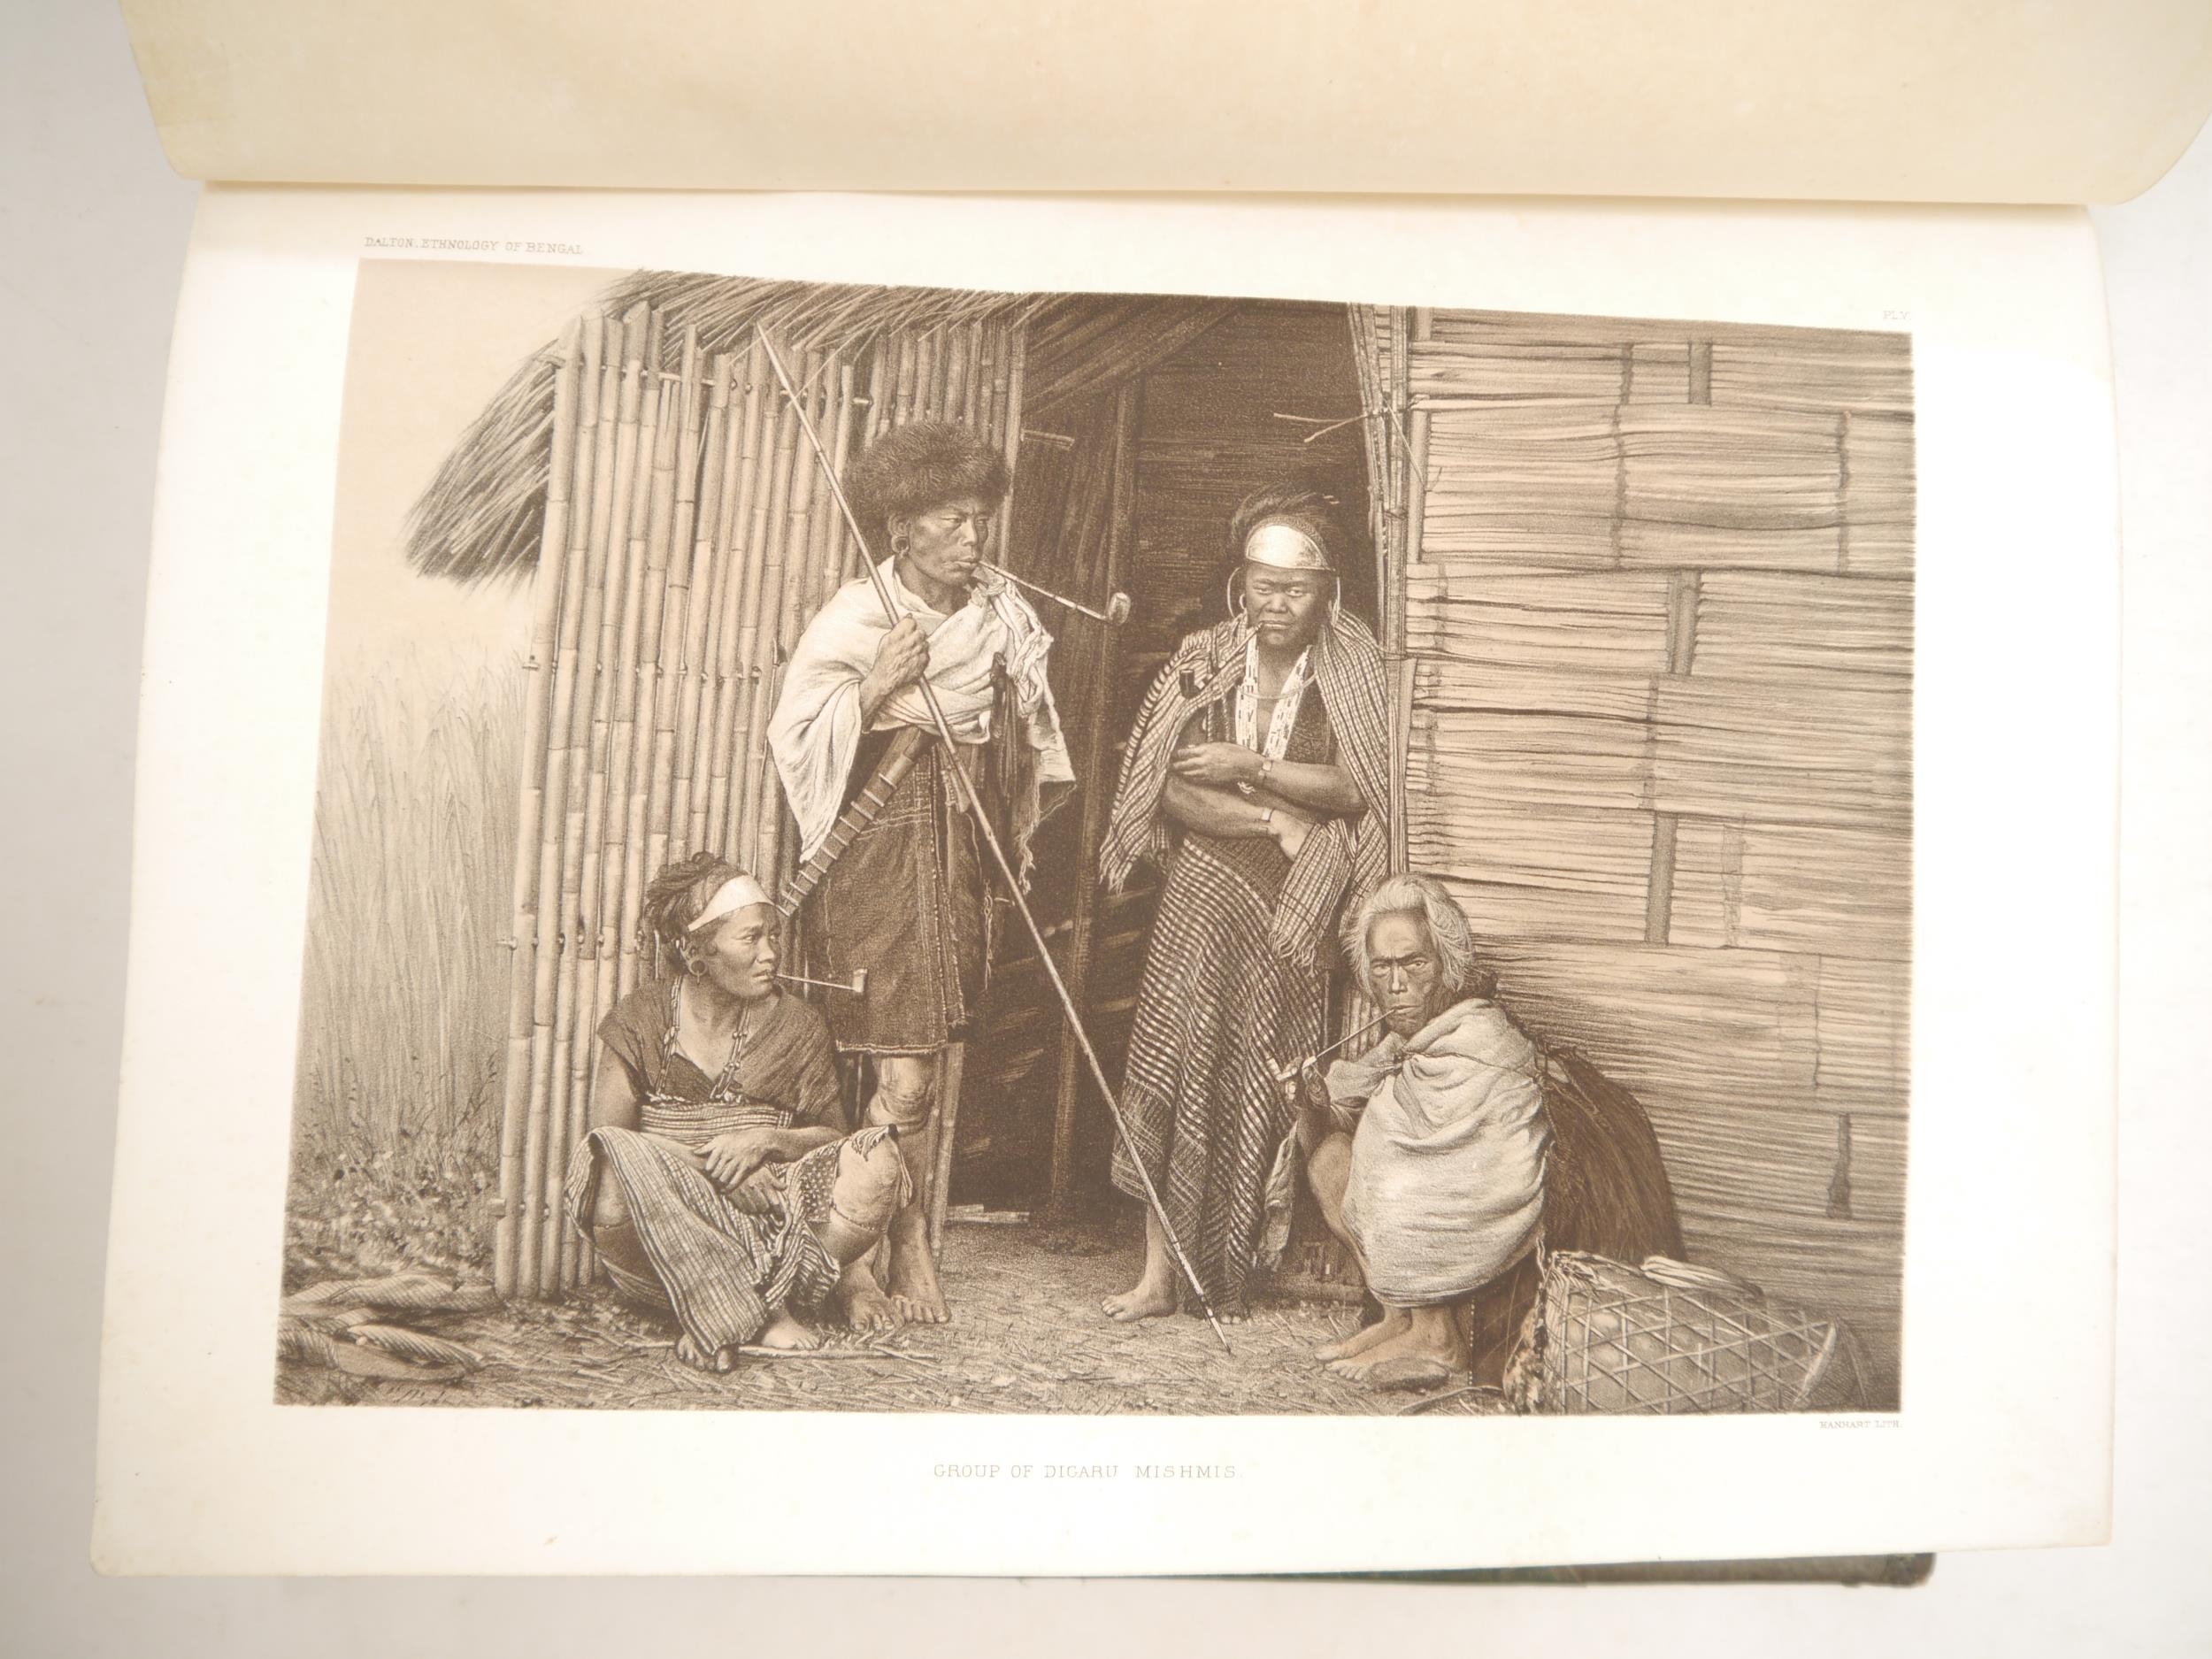 Edward Tuite Dalton: 'Descriptive Ethnology of Bengal', Calcutta, Office of the Superintendent of - Image 10 of 27